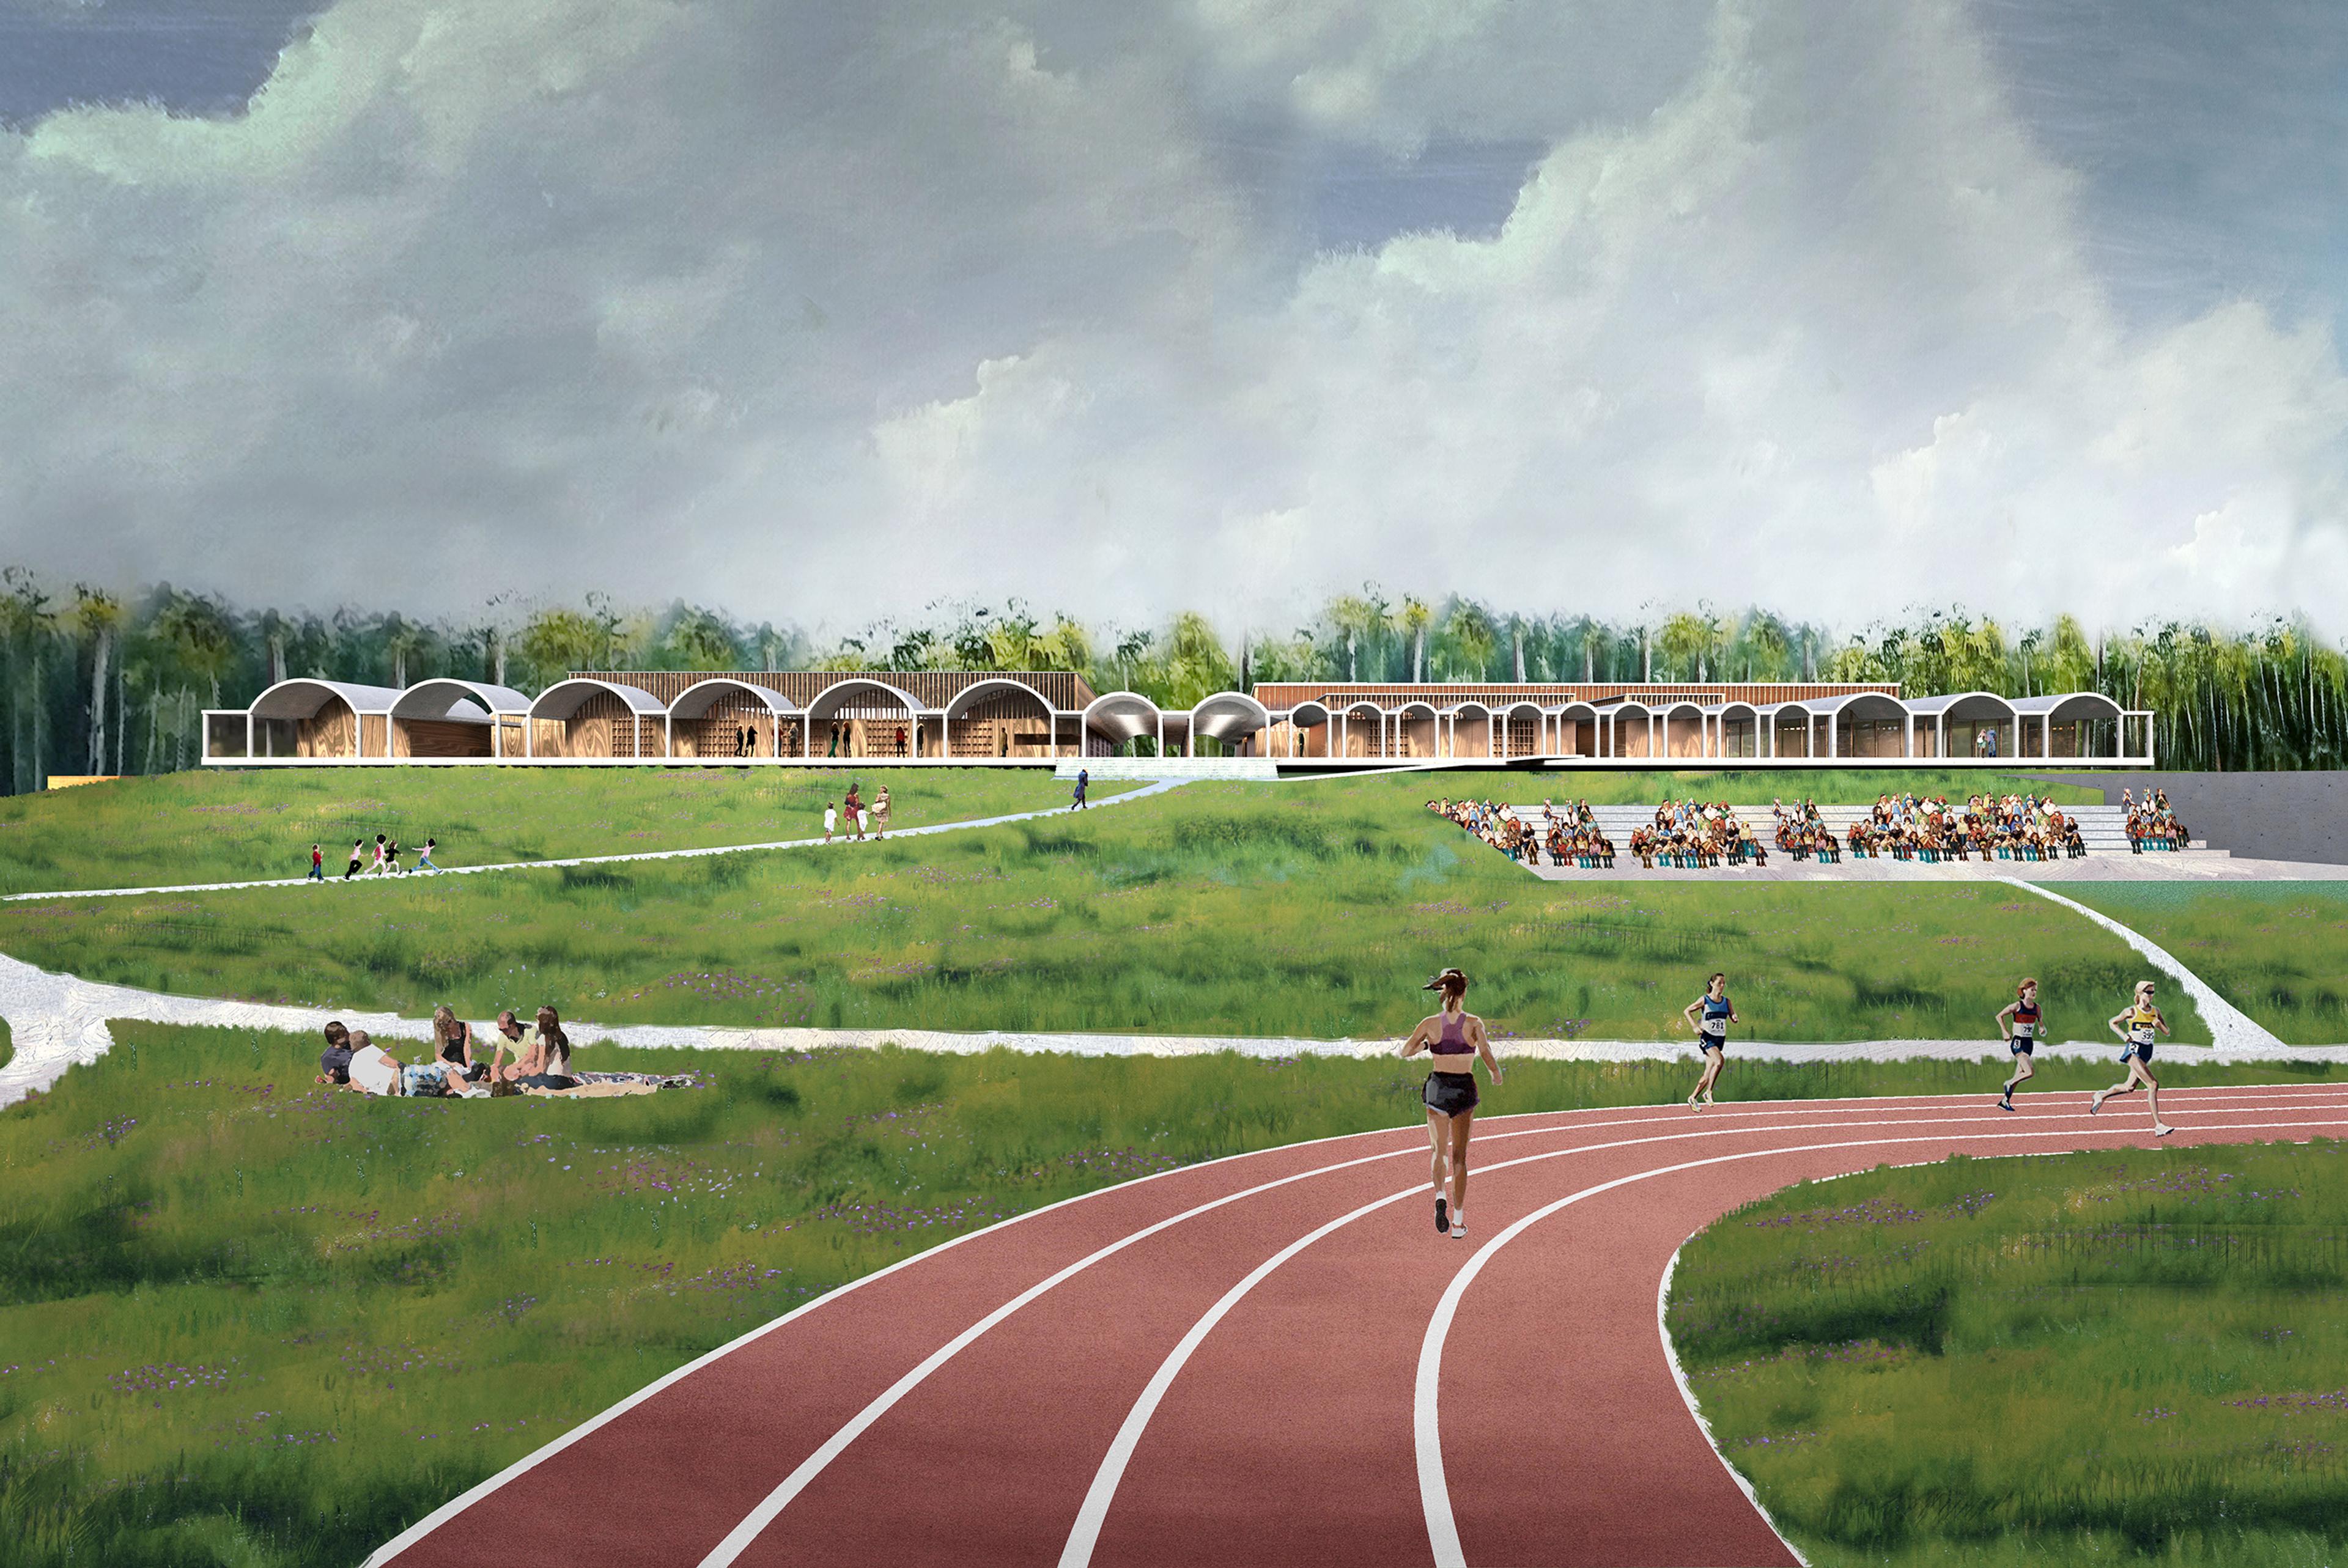 athletic track in a green field with structures in background